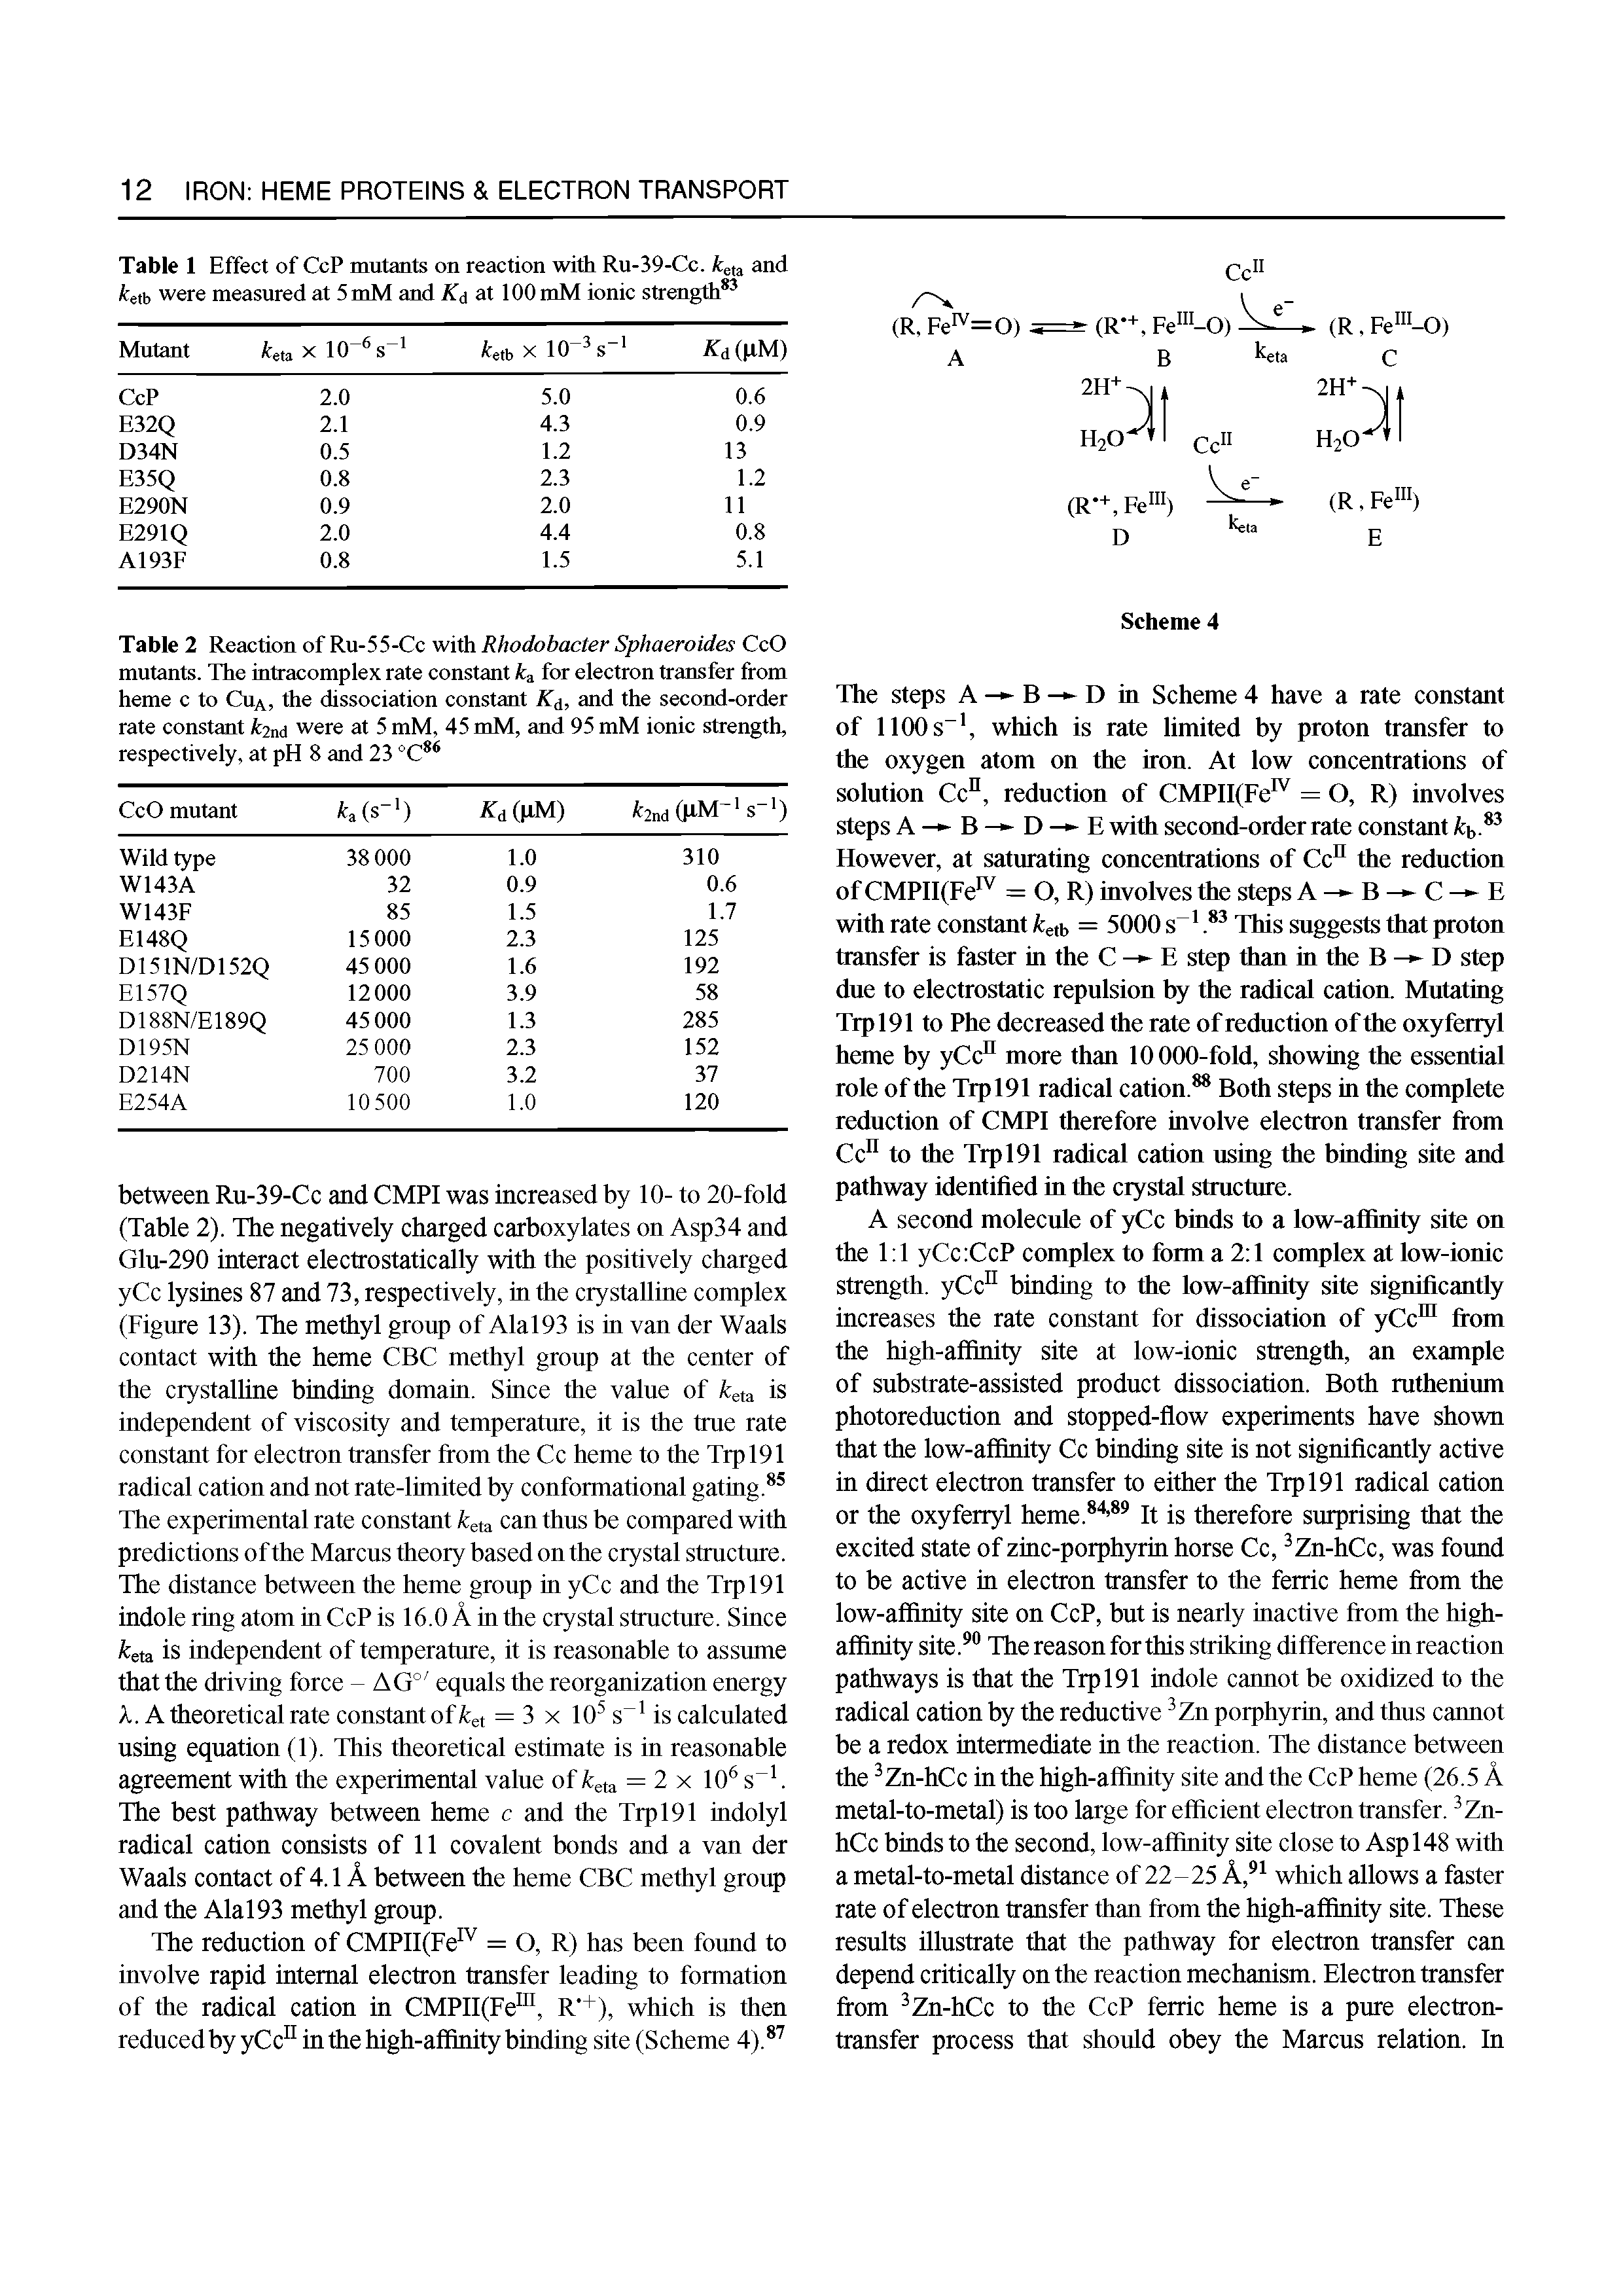 Table 2 Reaction of Ru-55-Cc with Rhodobacter Sphaeroides CcO mutants. The intracomplex rate constant A a for electron transfer from heme c to Cua, the dissociation constant K, and the second-order rate constant k2nd were at 5 mM, 45 mM, and 95 mM ionic strength, respectively, at pH 8 and 23...